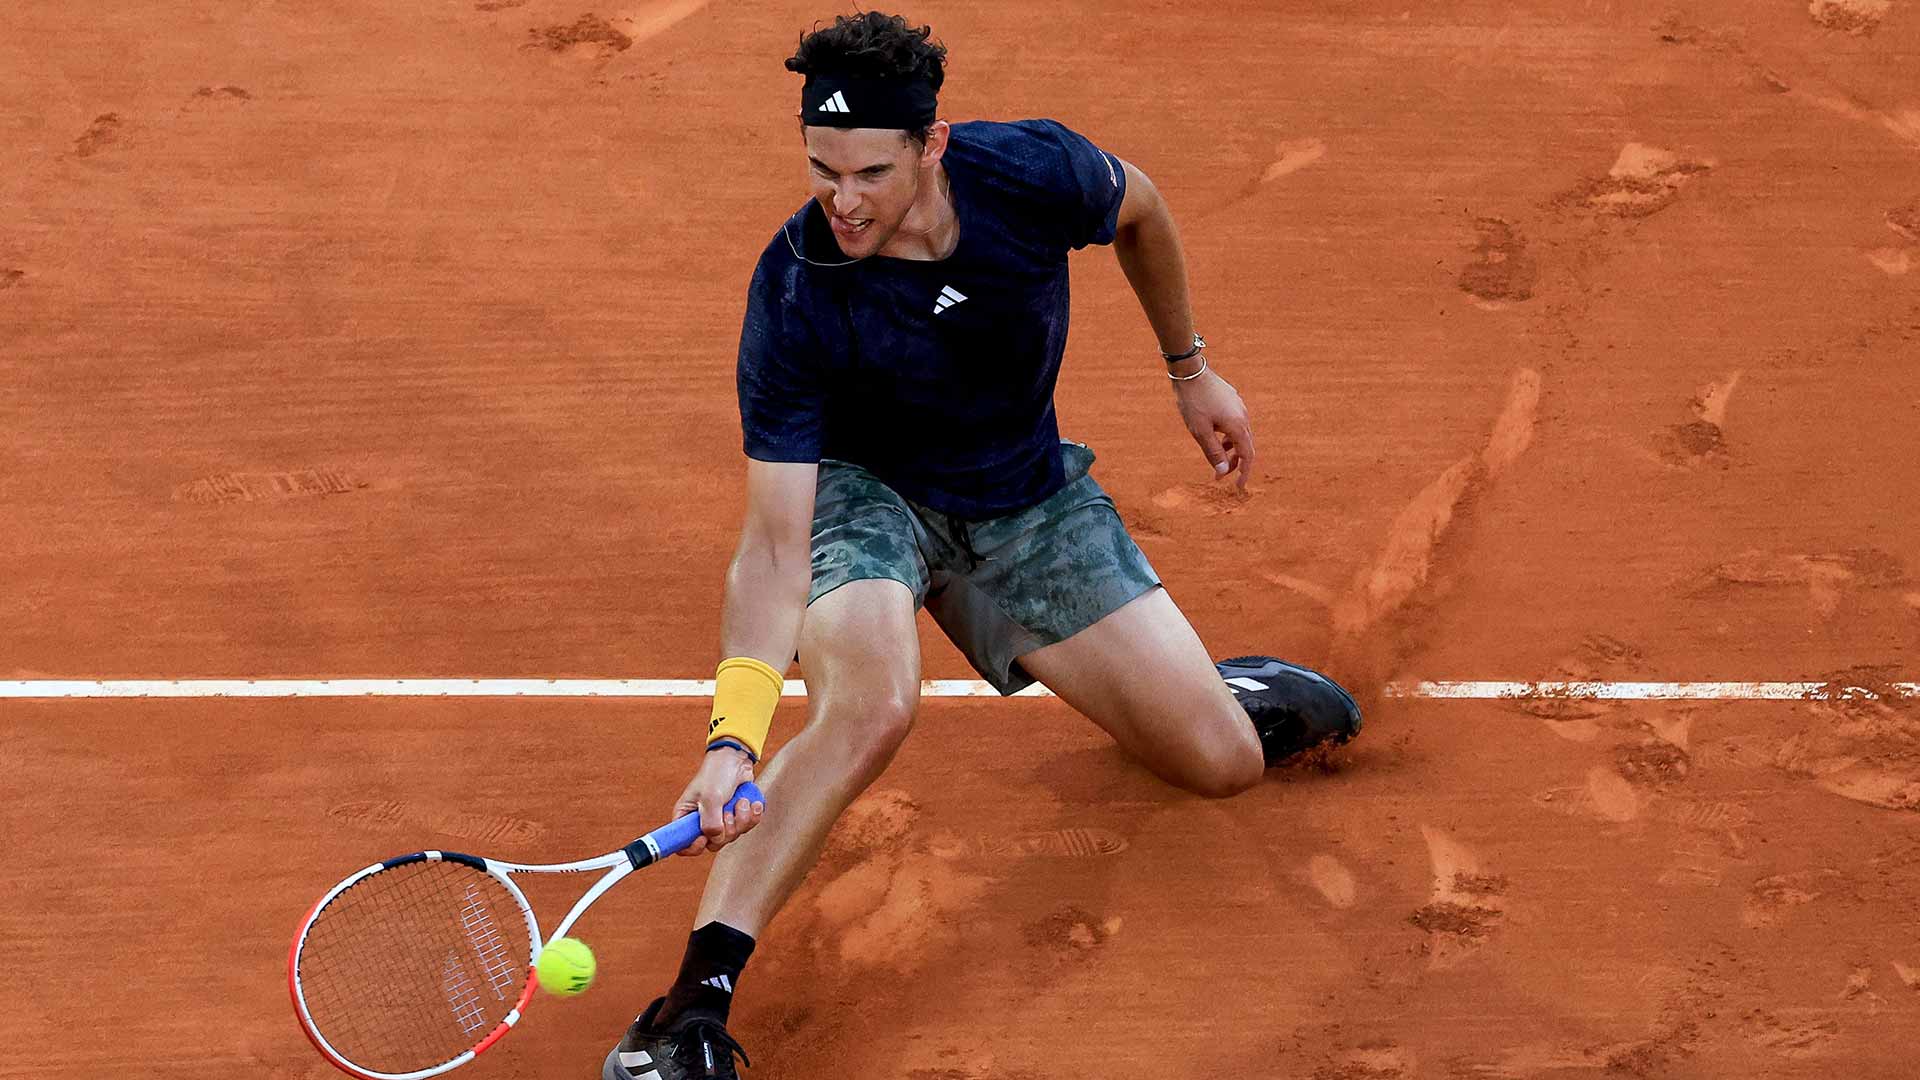 Dominic Thiem reached the final at Roland Garros in 2018 and 2019.